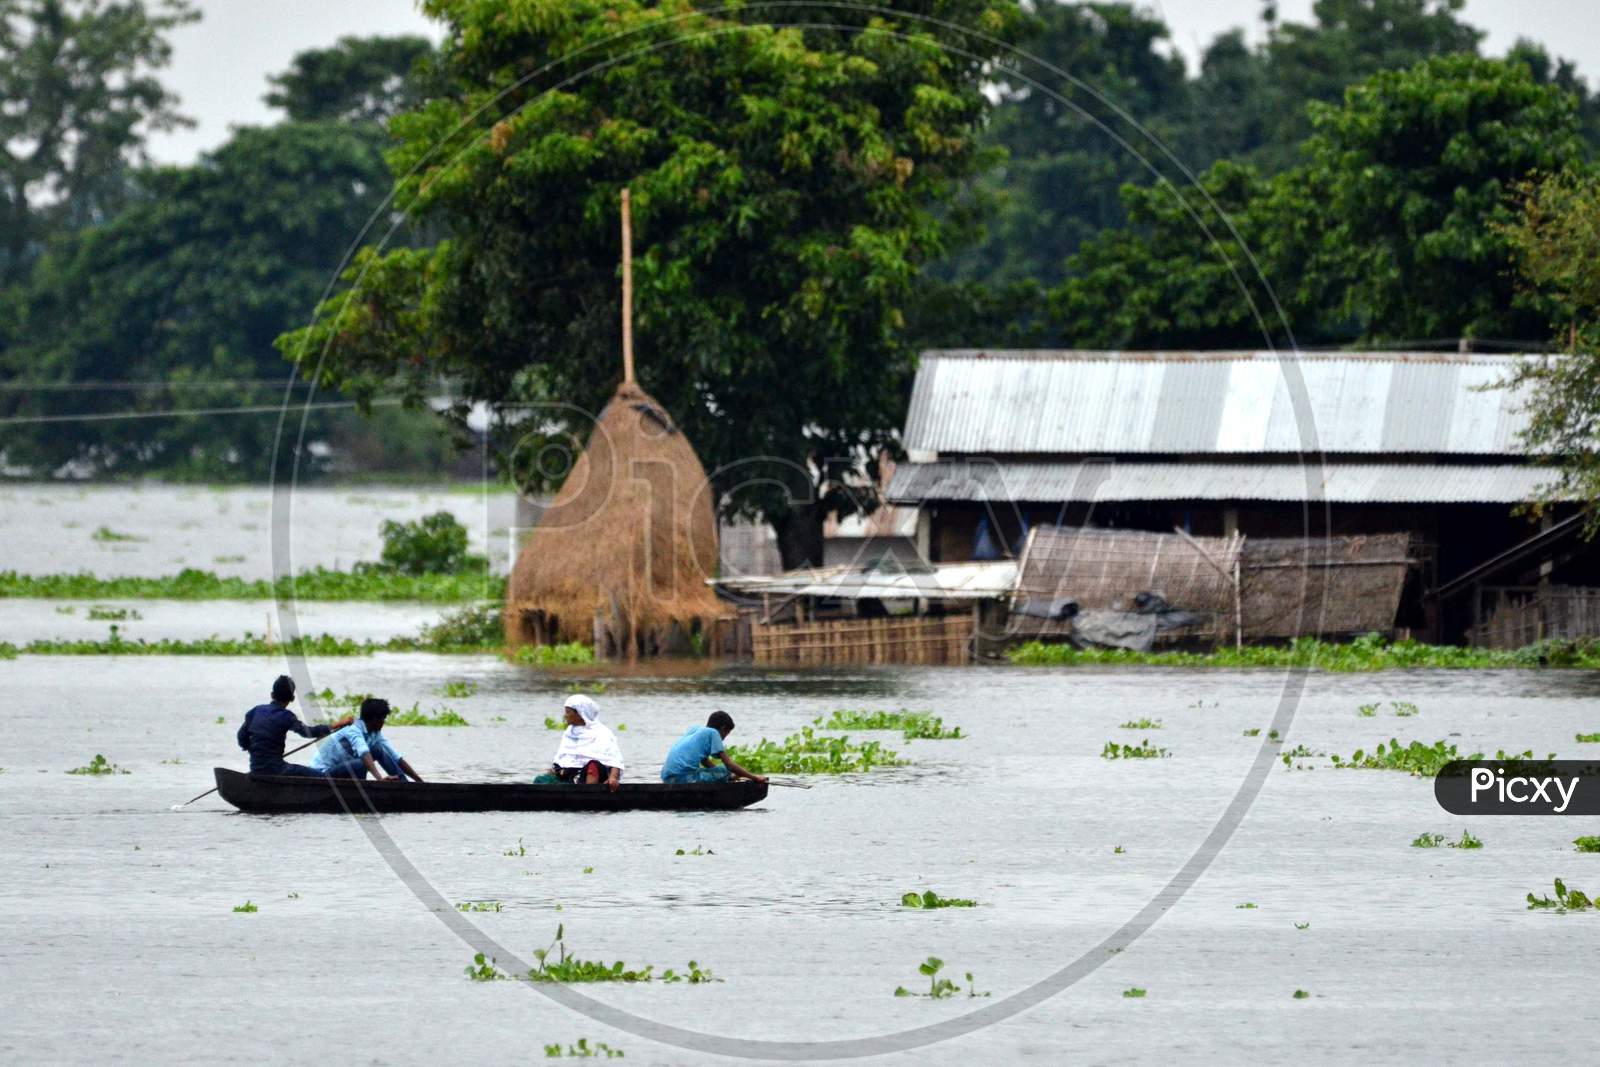 Villagers Uses A bamboo Raft T Near Submerged Houses In A Village Near Kaziranga National Park In Golaghat District Of Assam On July 26,2016